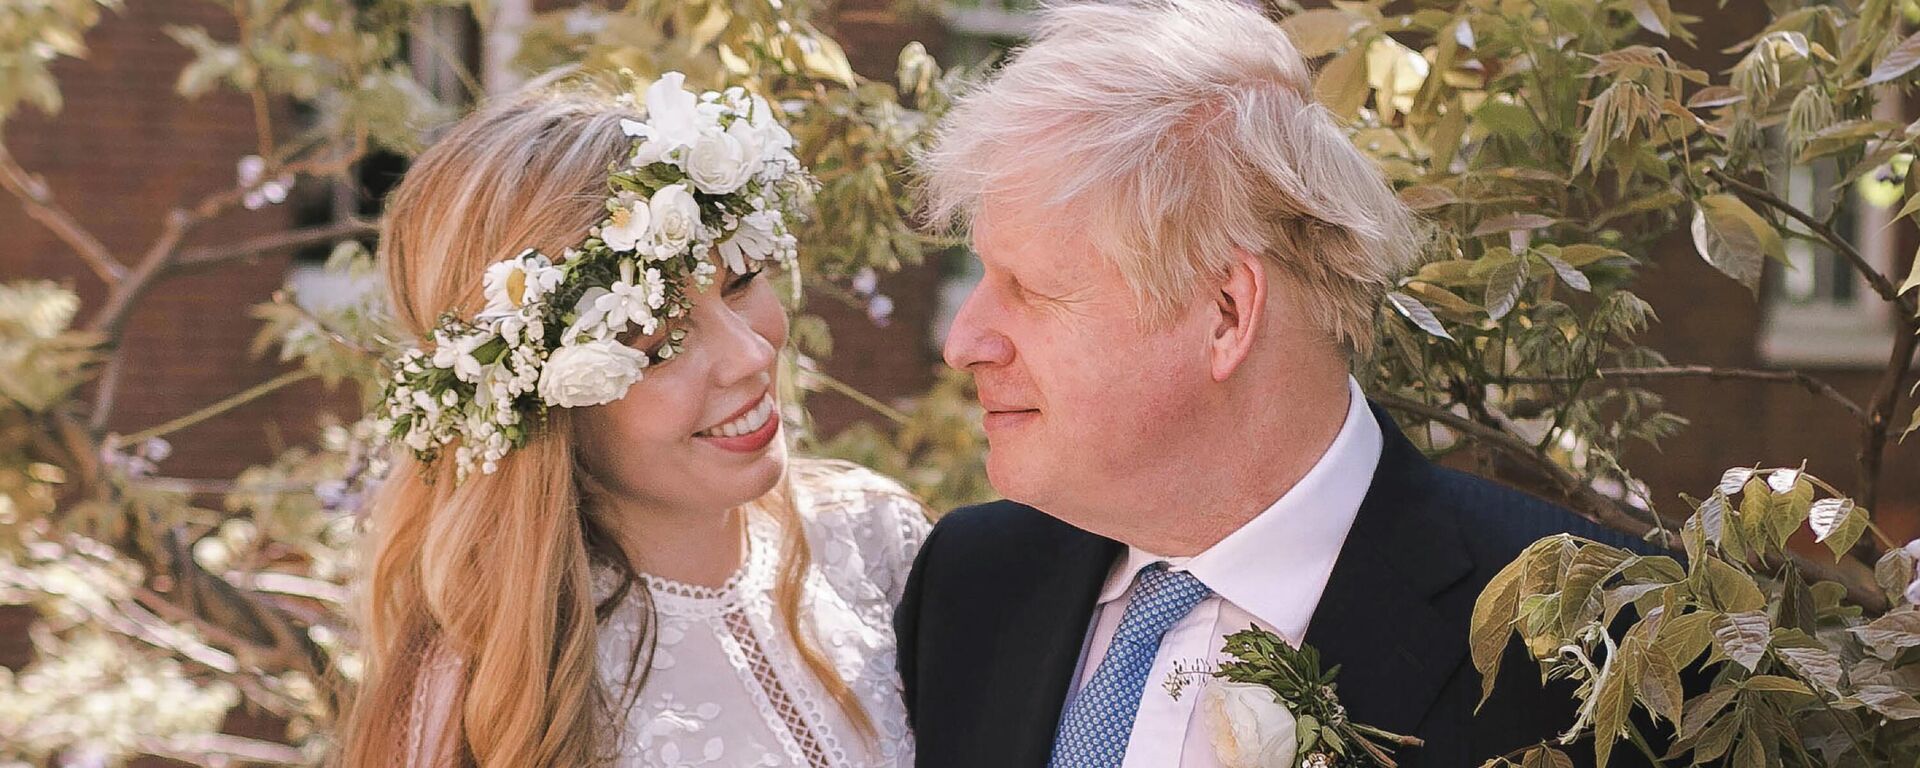 Britain's Prime Minister Boris Johnson and his wife Carrie Johnson in the garden of 10 Downing Street, London after their wedding on Saturday, May 29, 2021. - Sputnik International, 1920, 08.07.2022